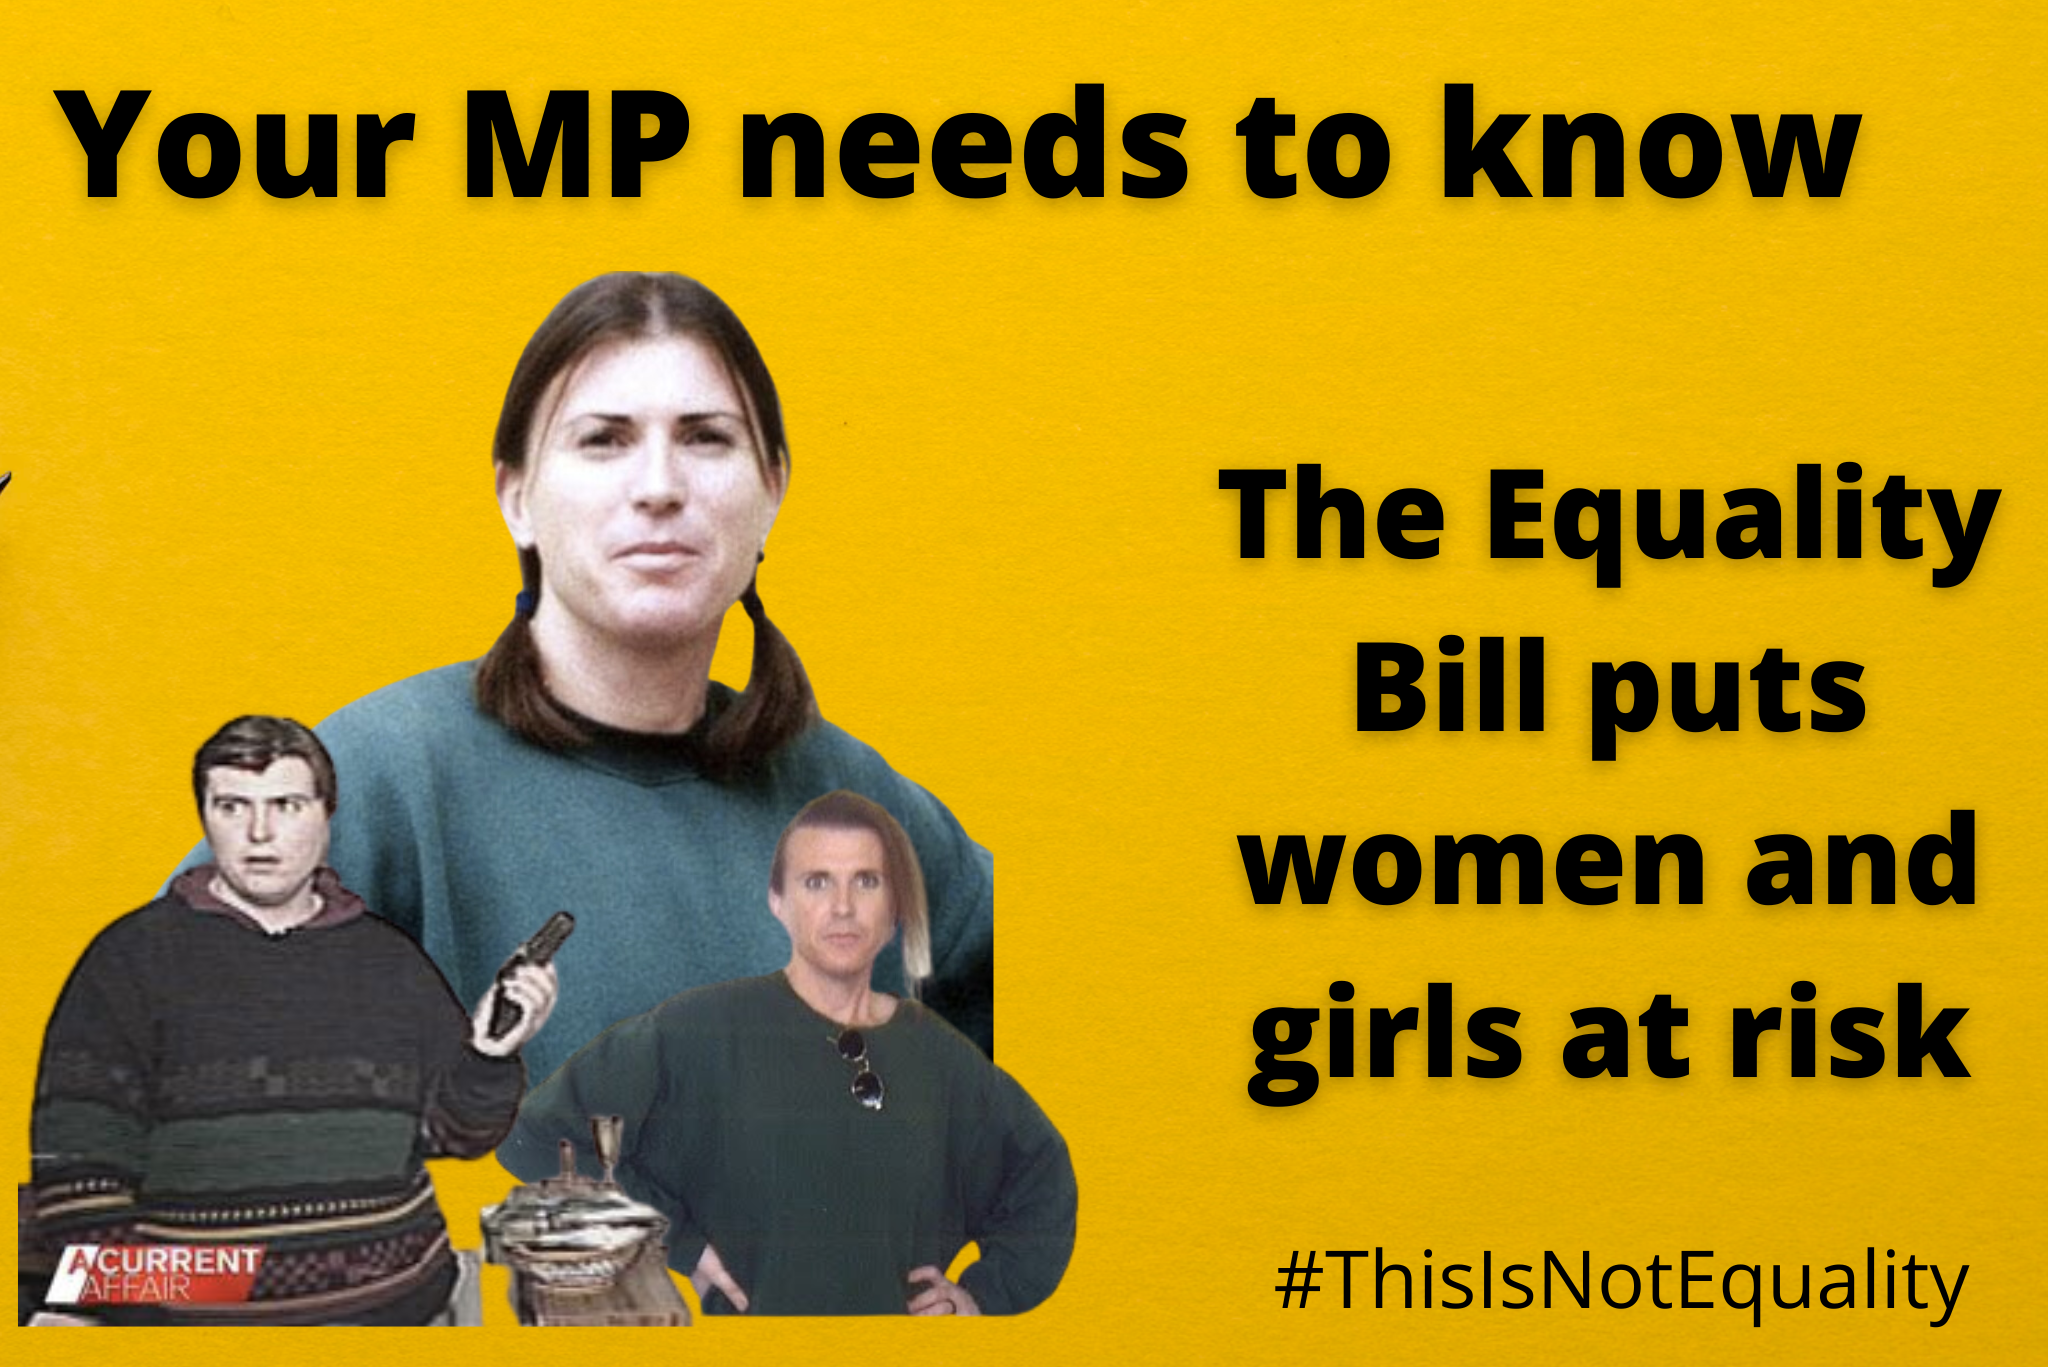 Tell your MP: The Equality Bill puts women and girls at risk